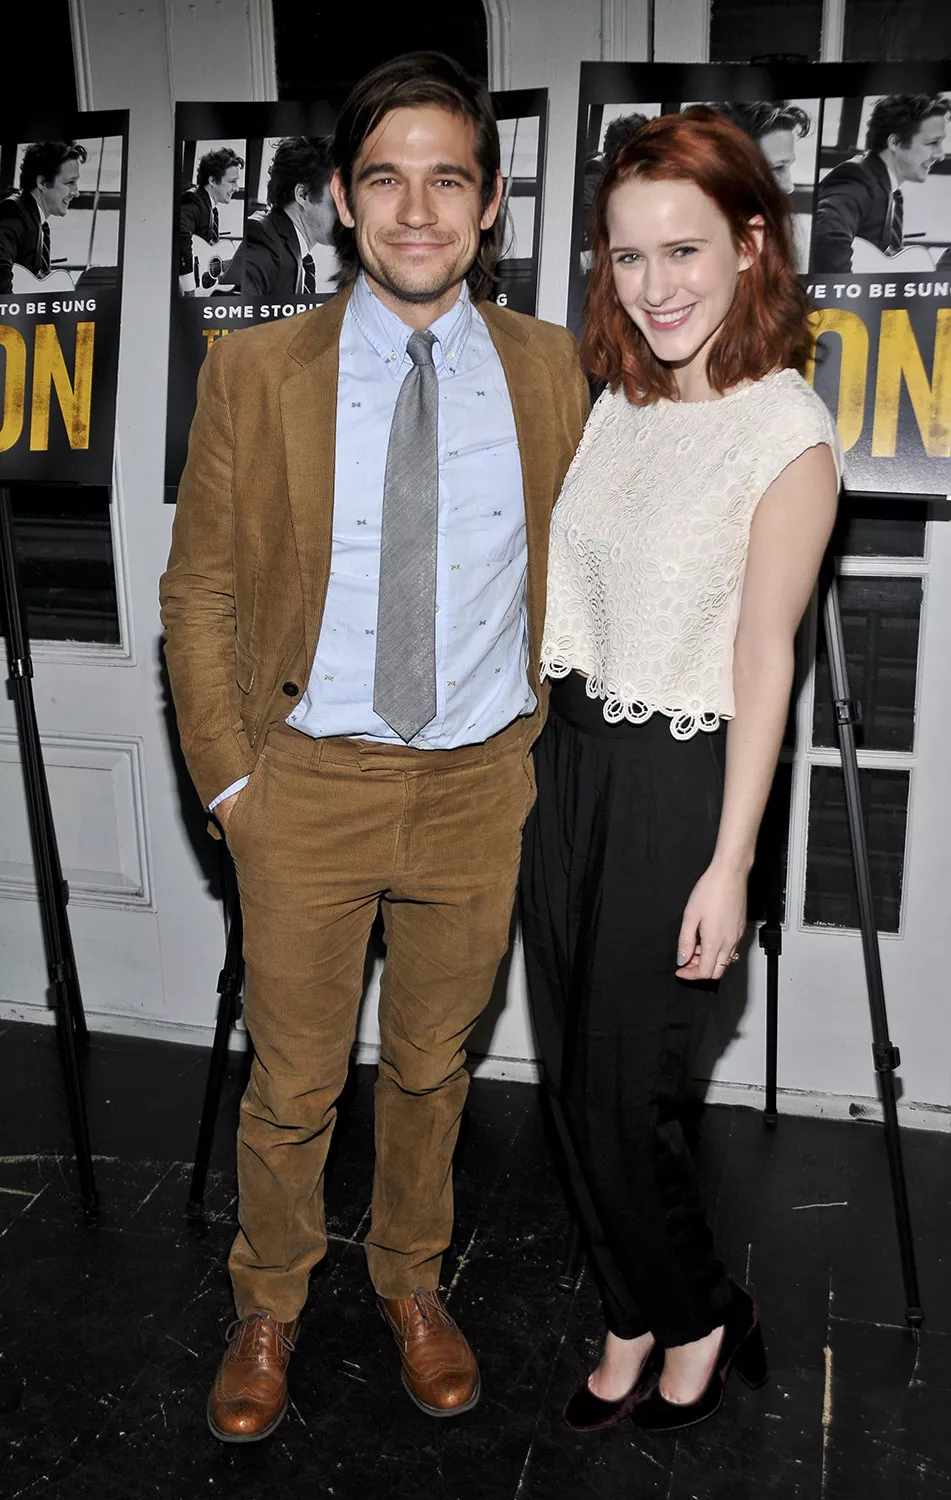 Rachel Brosnahan and Jason Ralph at their first public event together